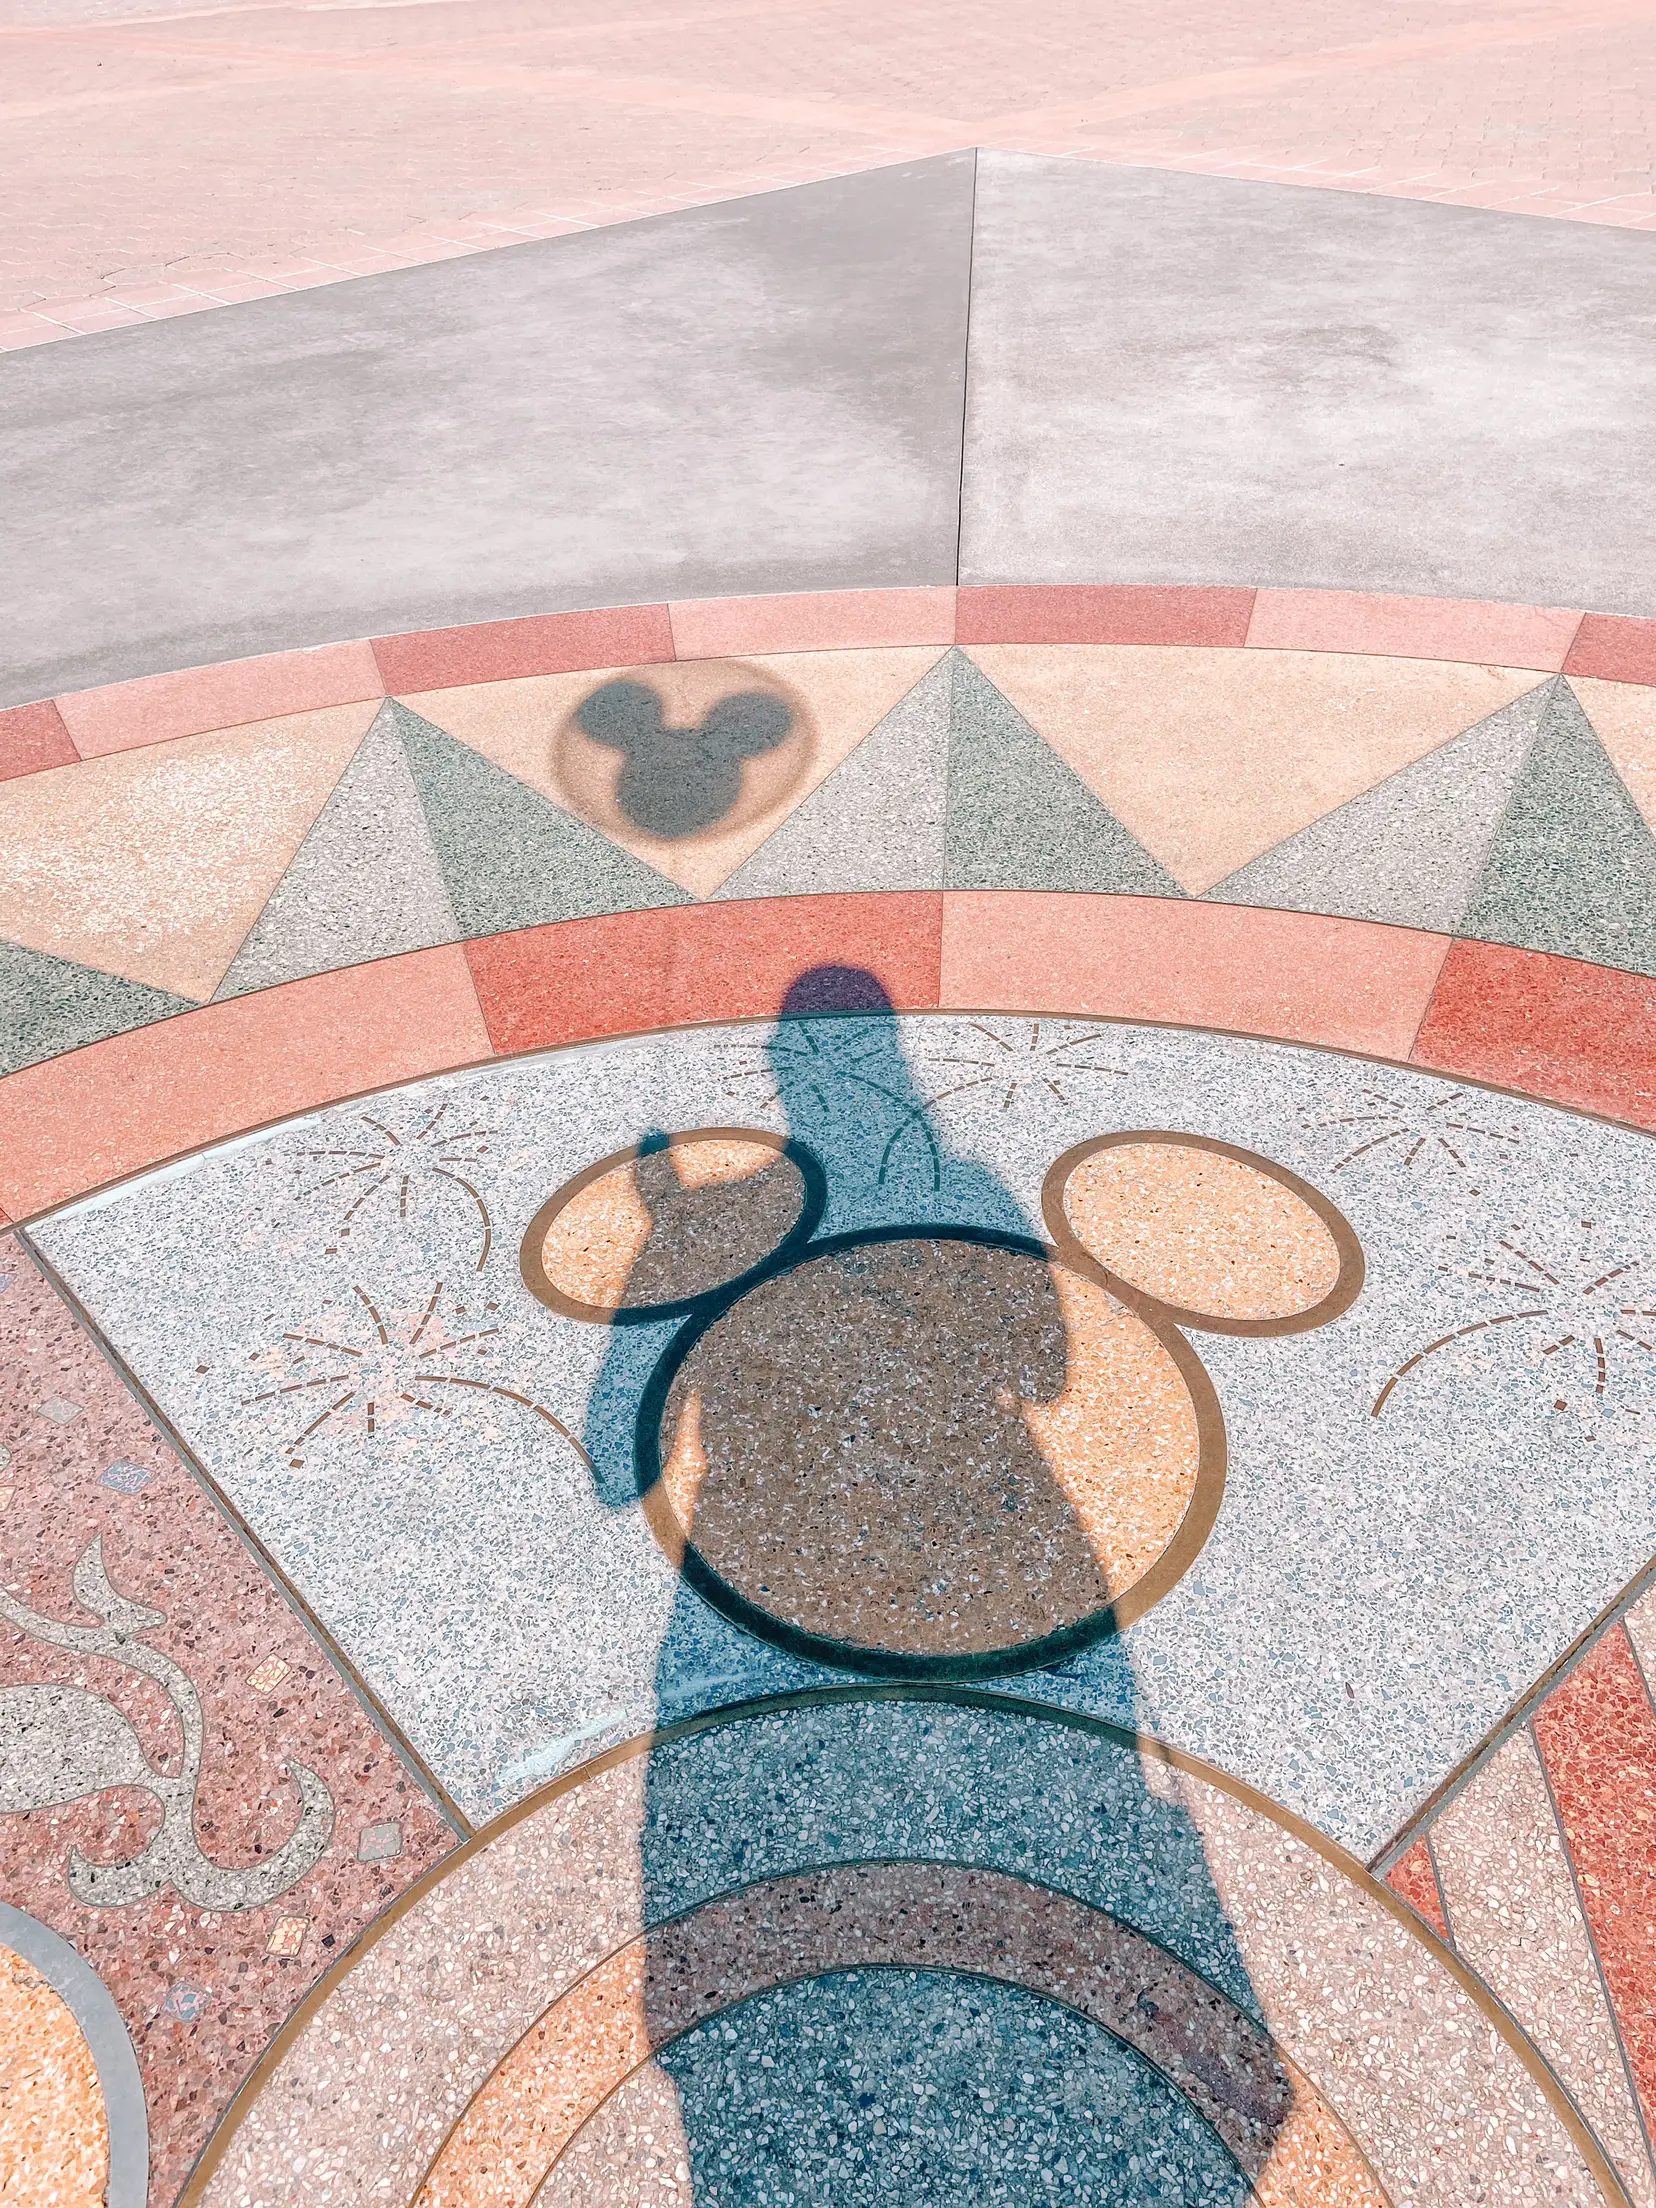  A person is walking on a tile floor with a Mickey Mouse shadow.